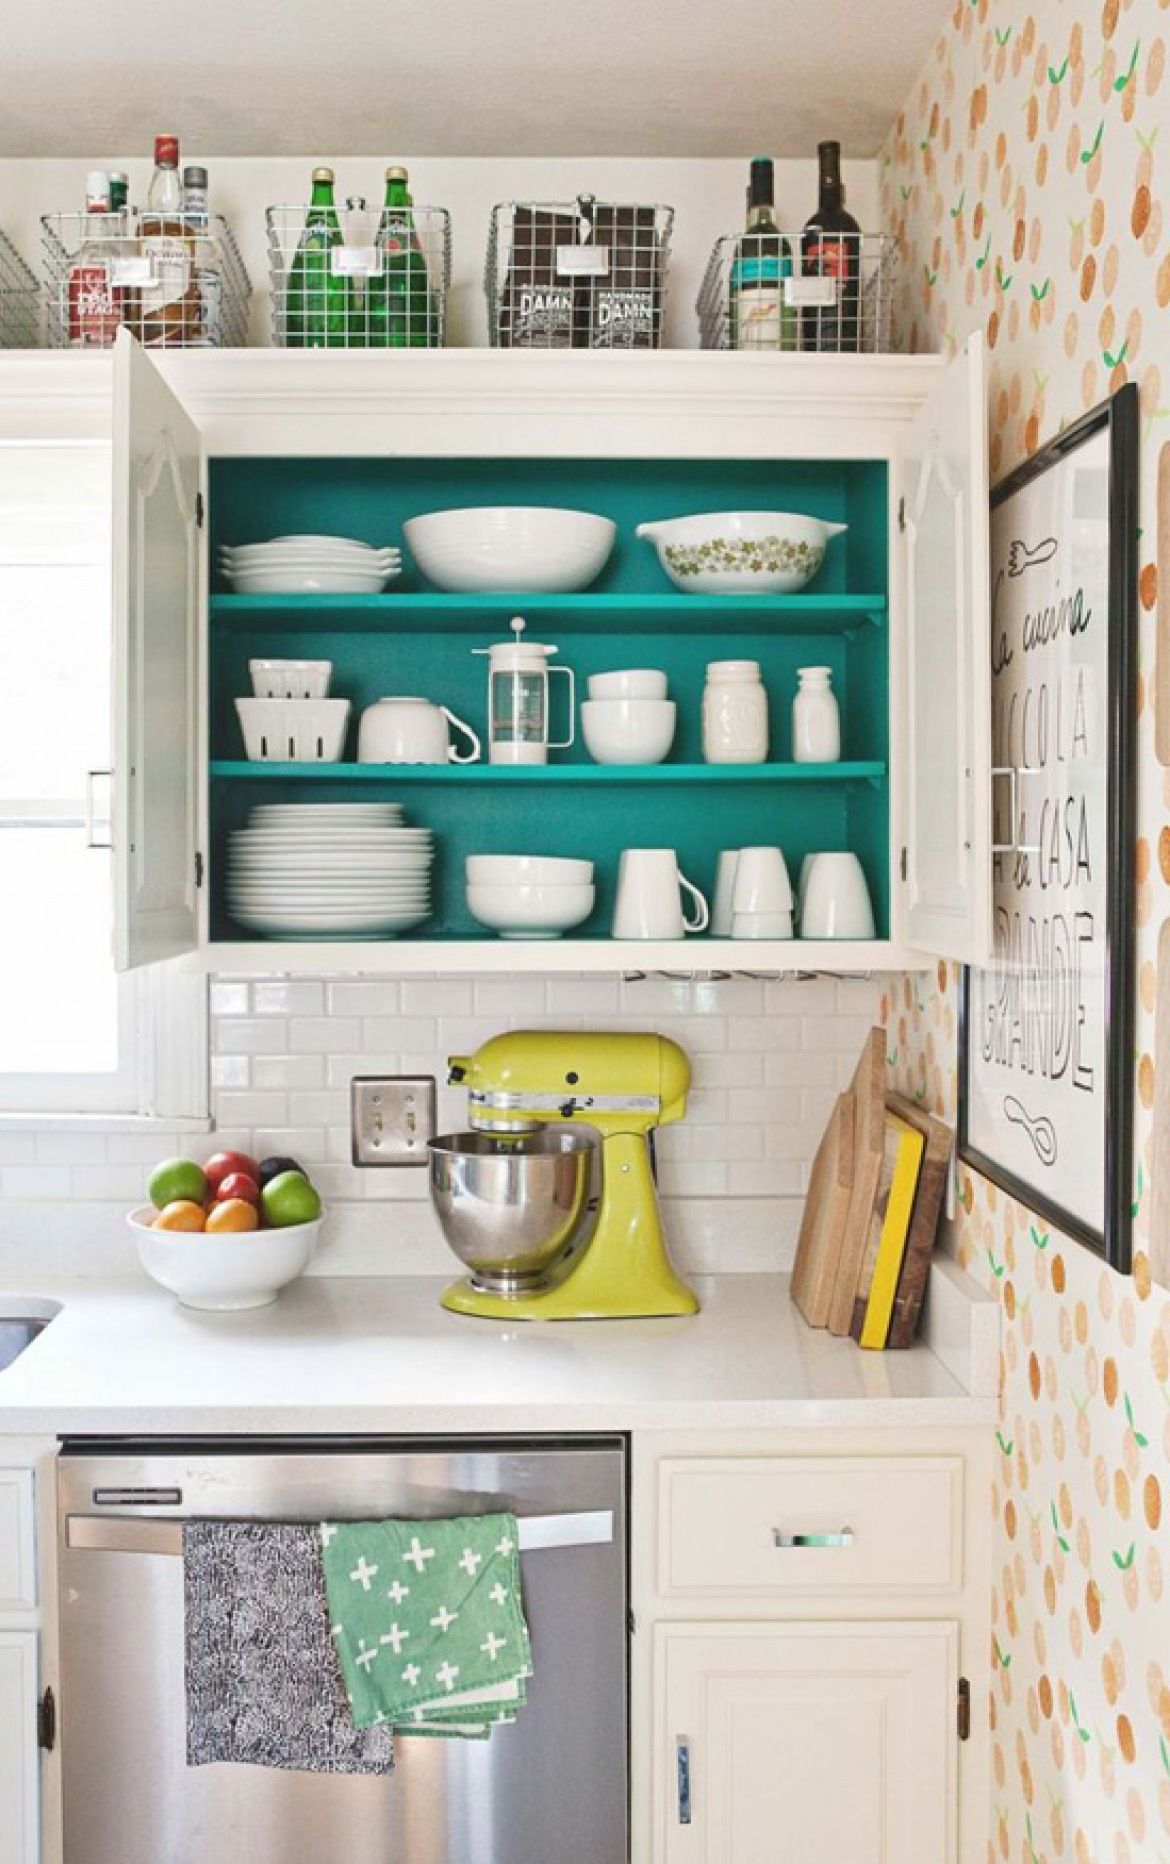 Maximizing cabinet top 2 80+ Unusual Kitchen Design Ideas for Small Spaces - 20